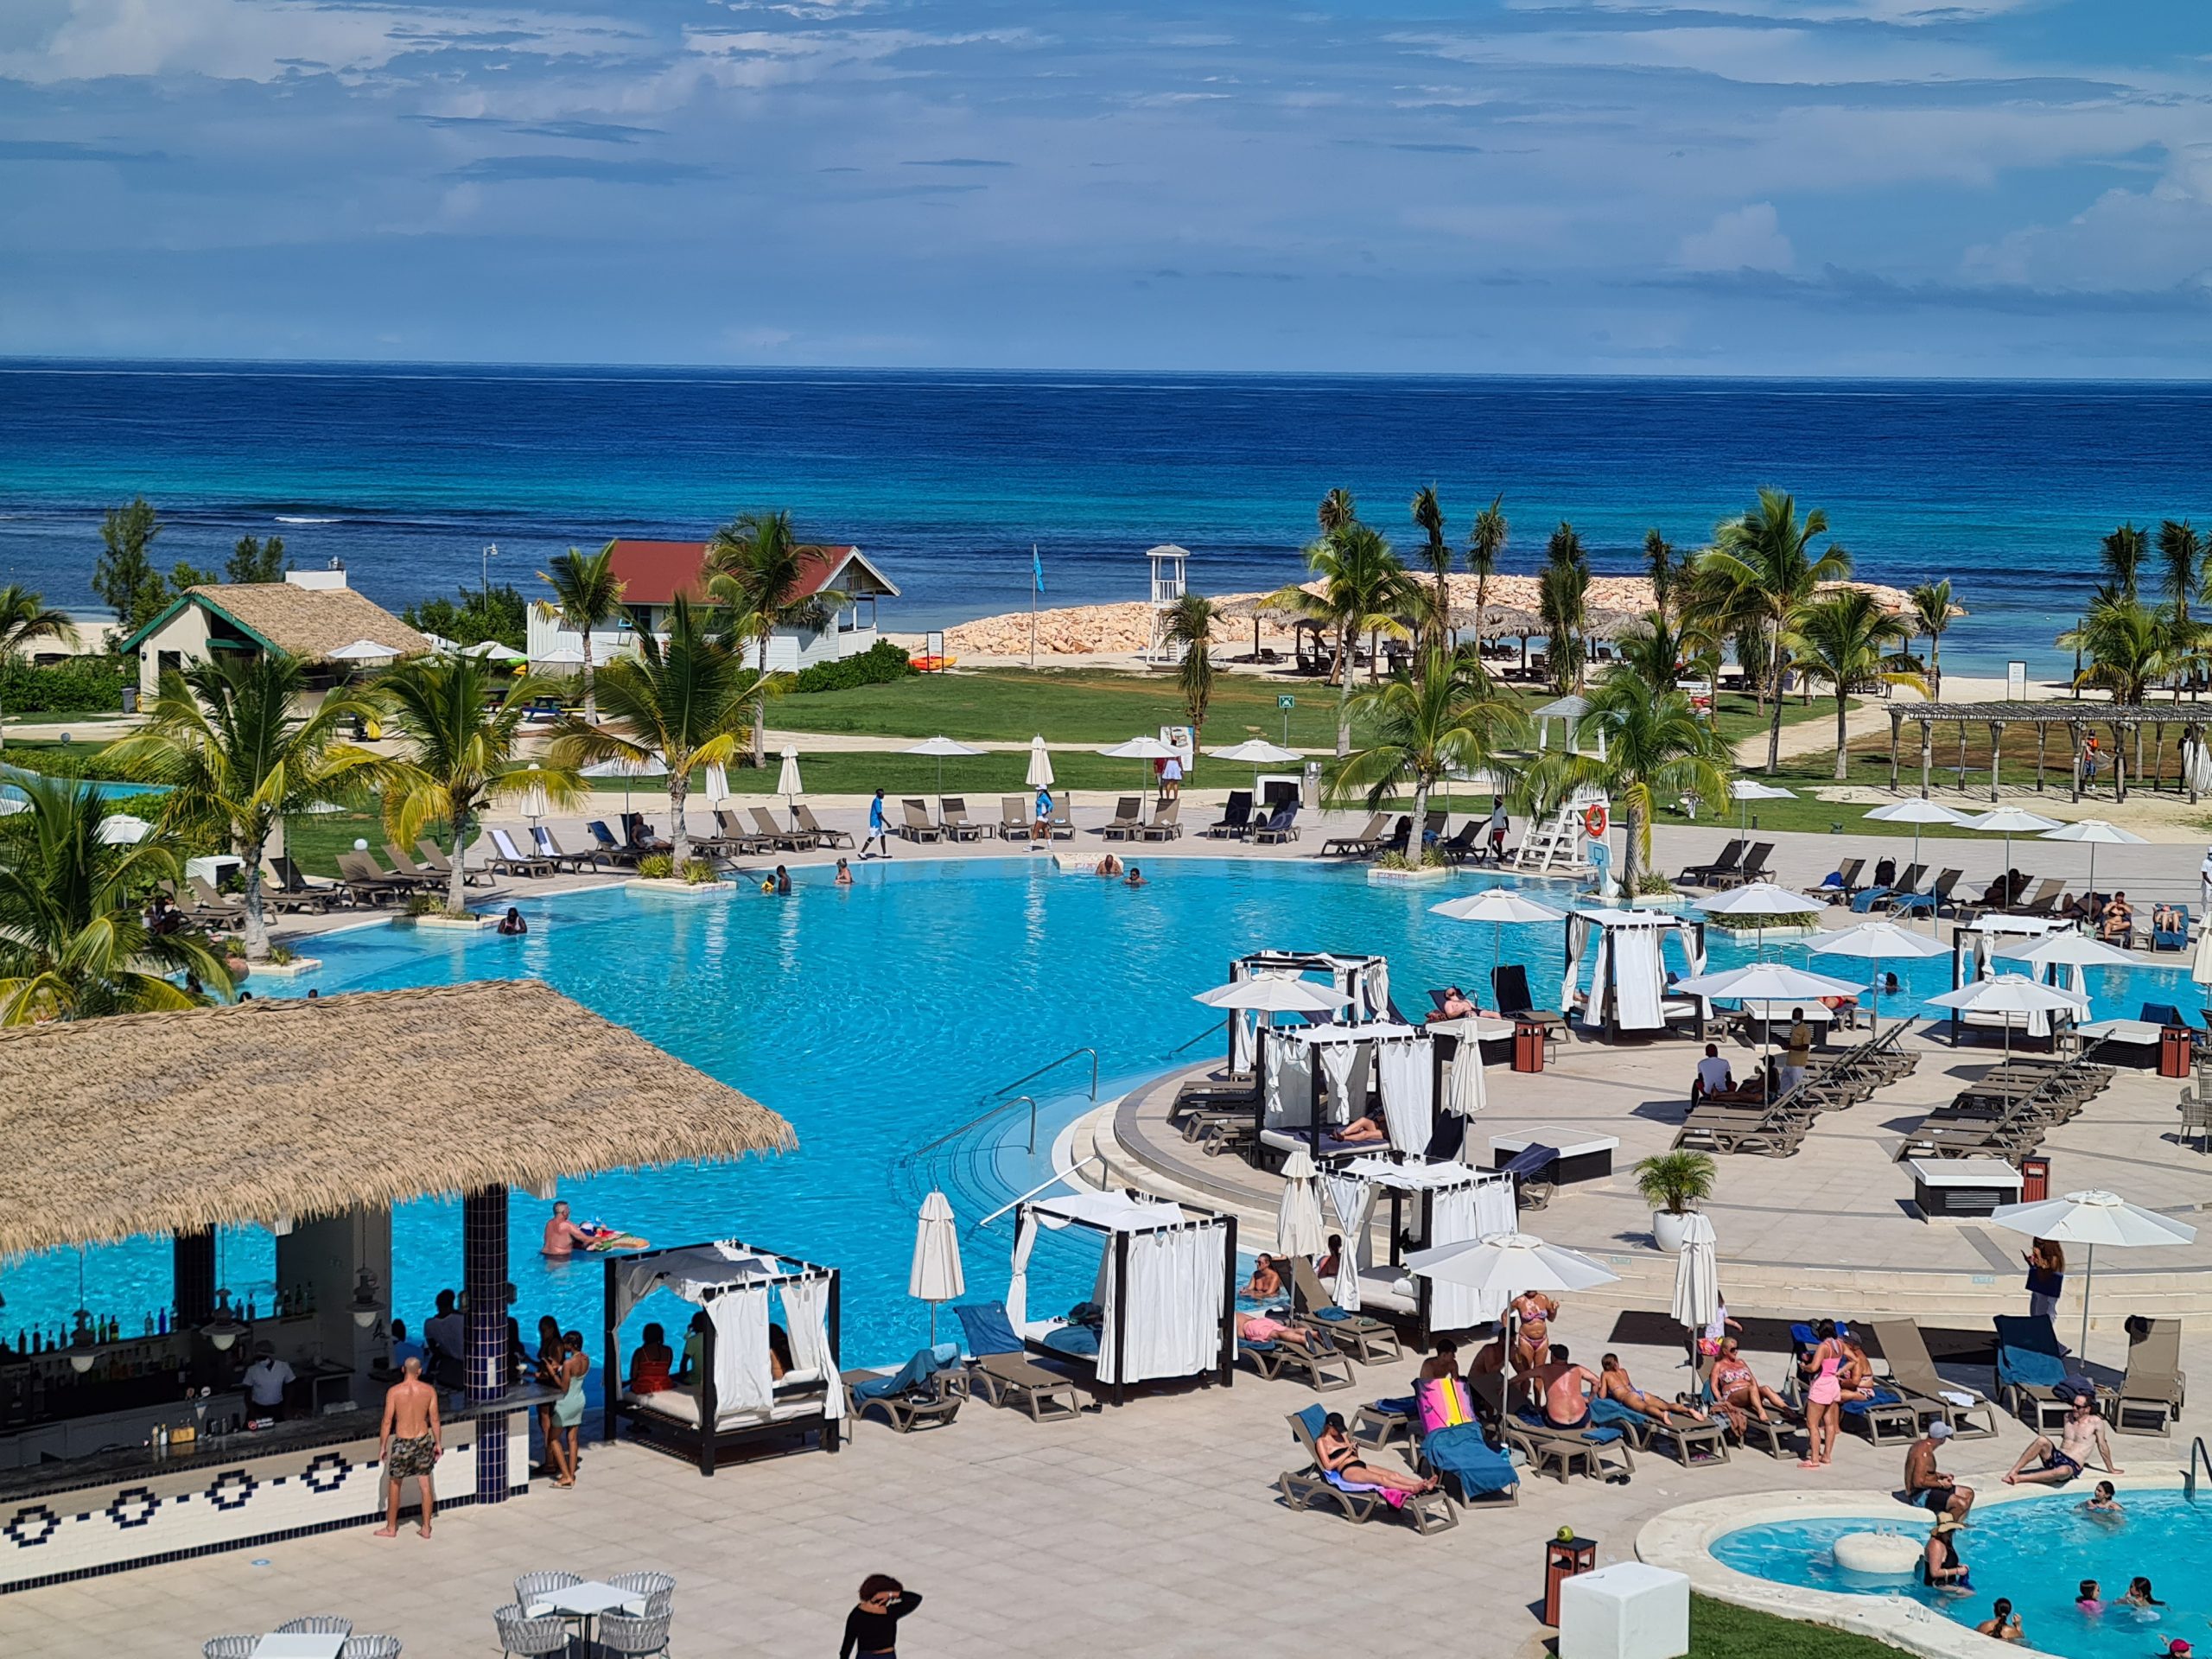 Visiting Ocean Coral Spring - One of Jamaica's Most Famous Resorts